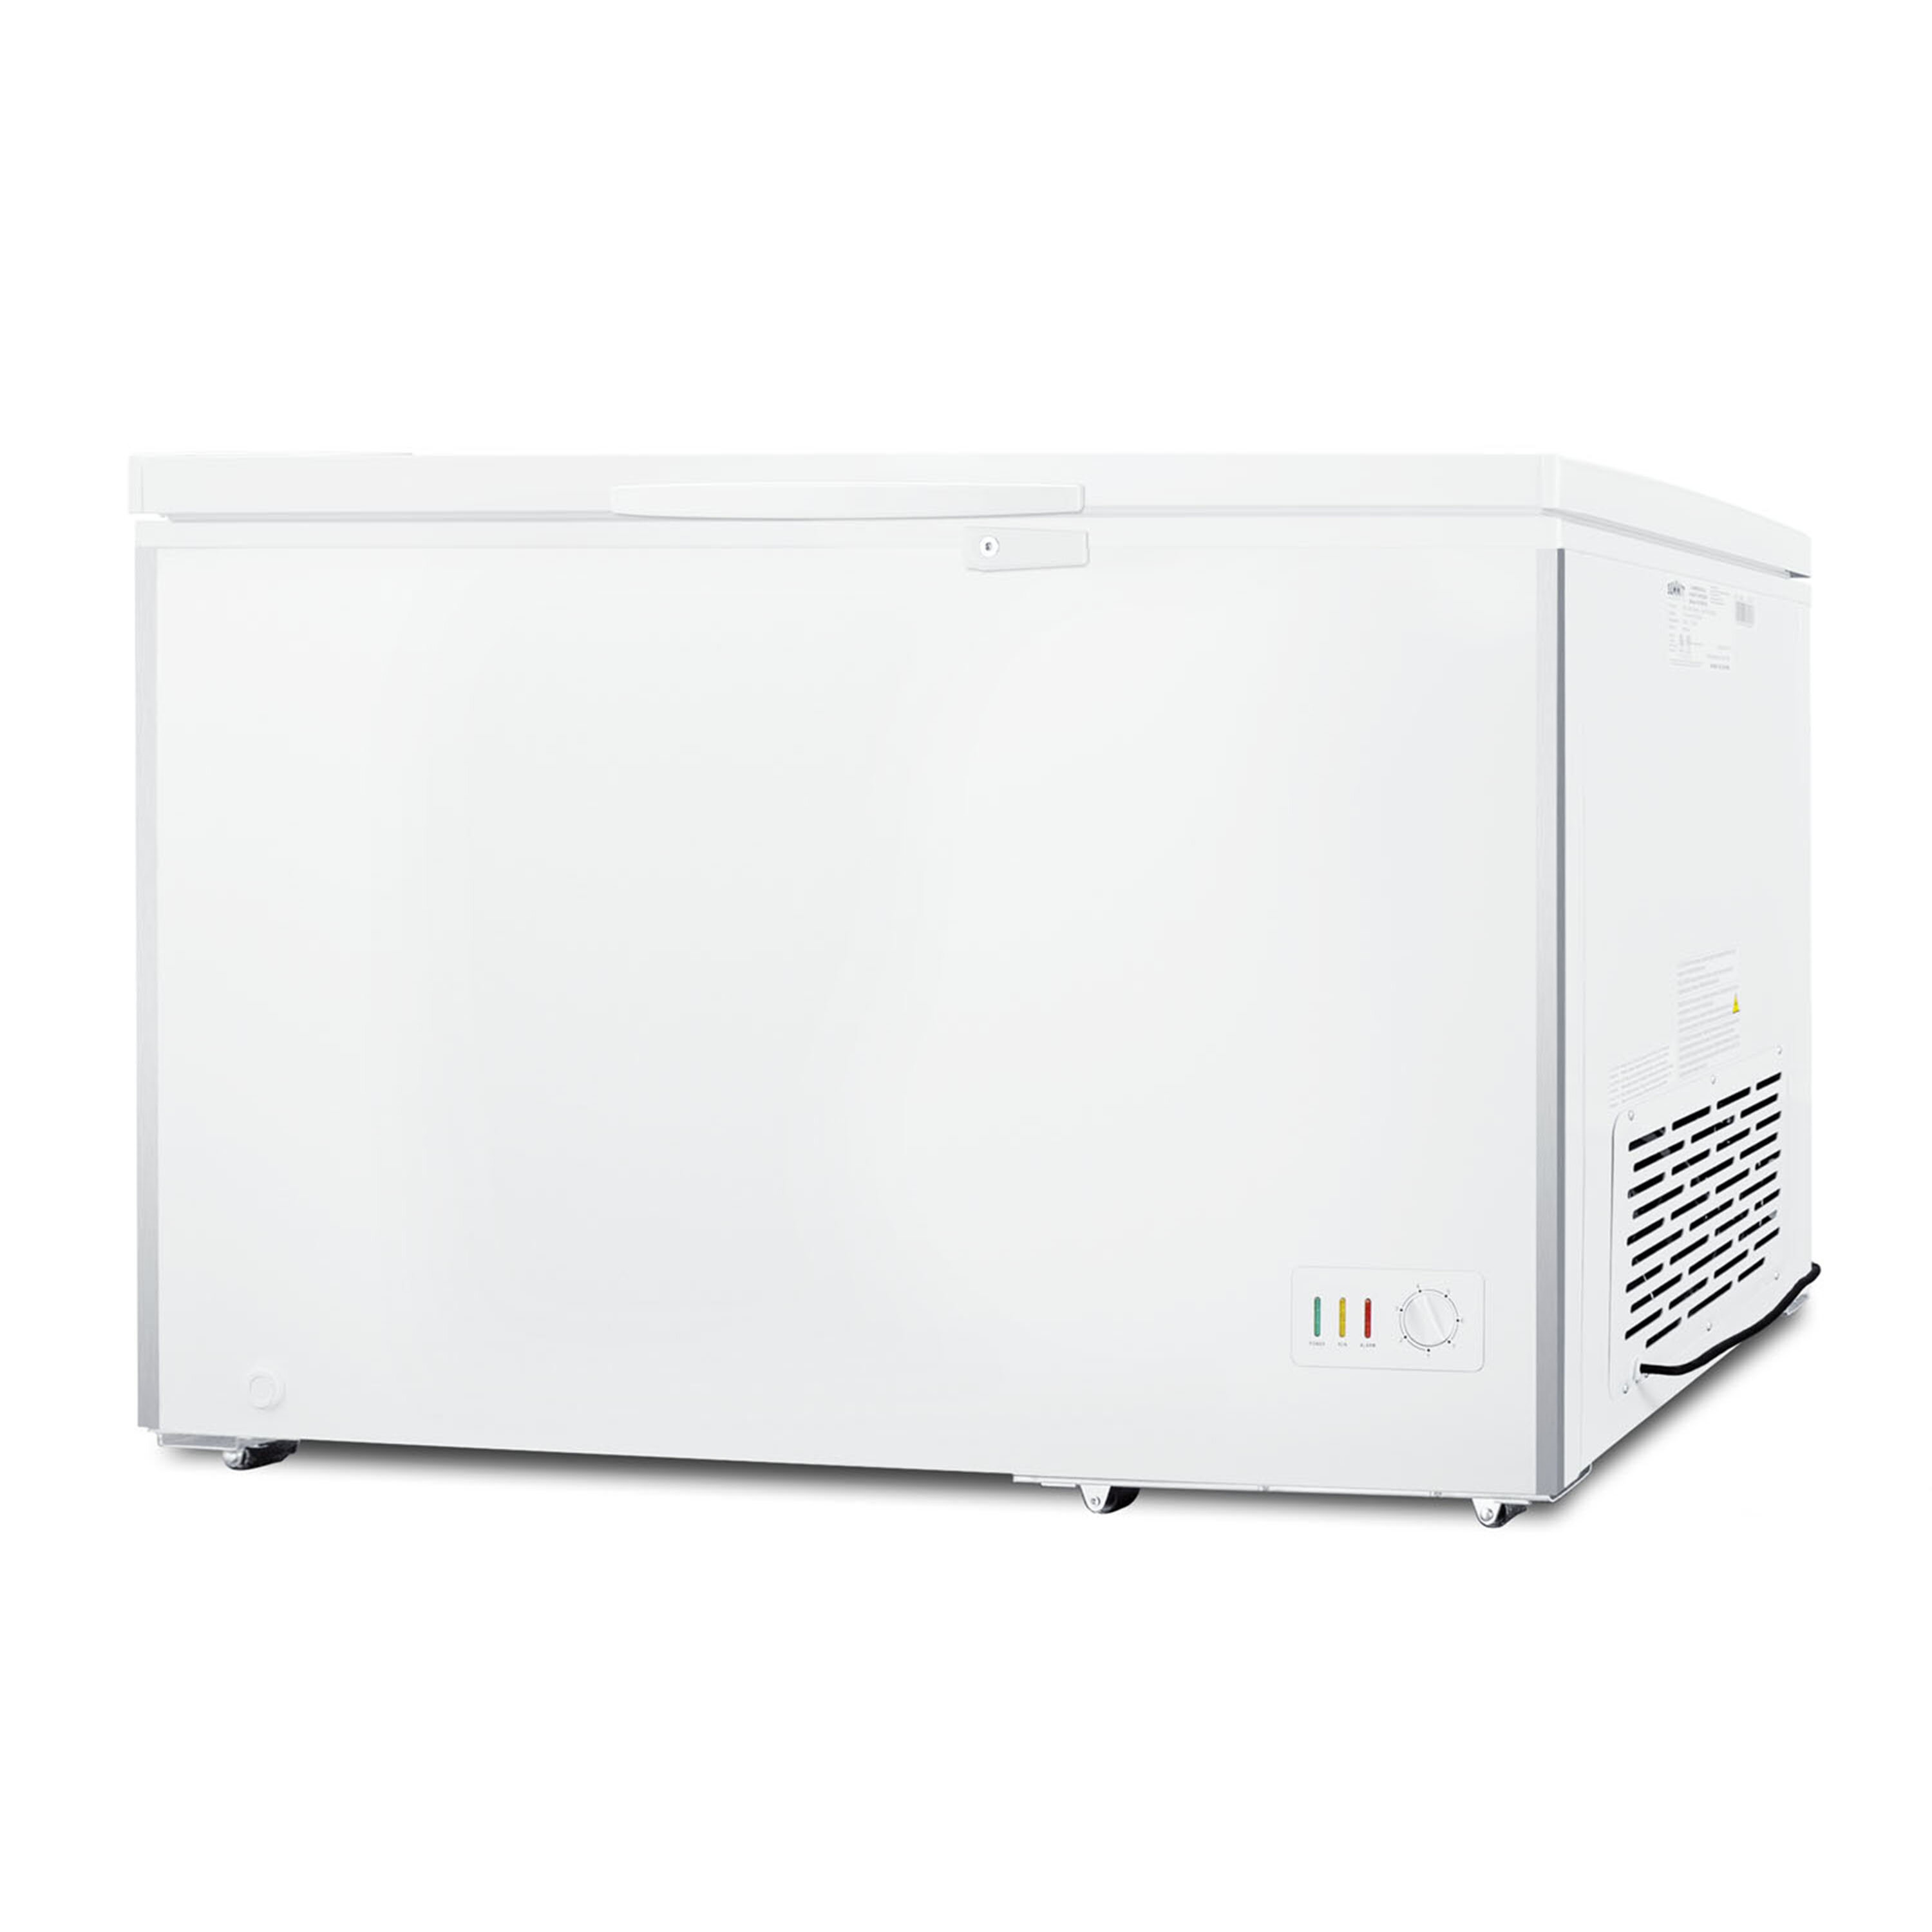 GE Garage Ready 10.7-cu ft Manual Defrost Chest Freezer (White) in